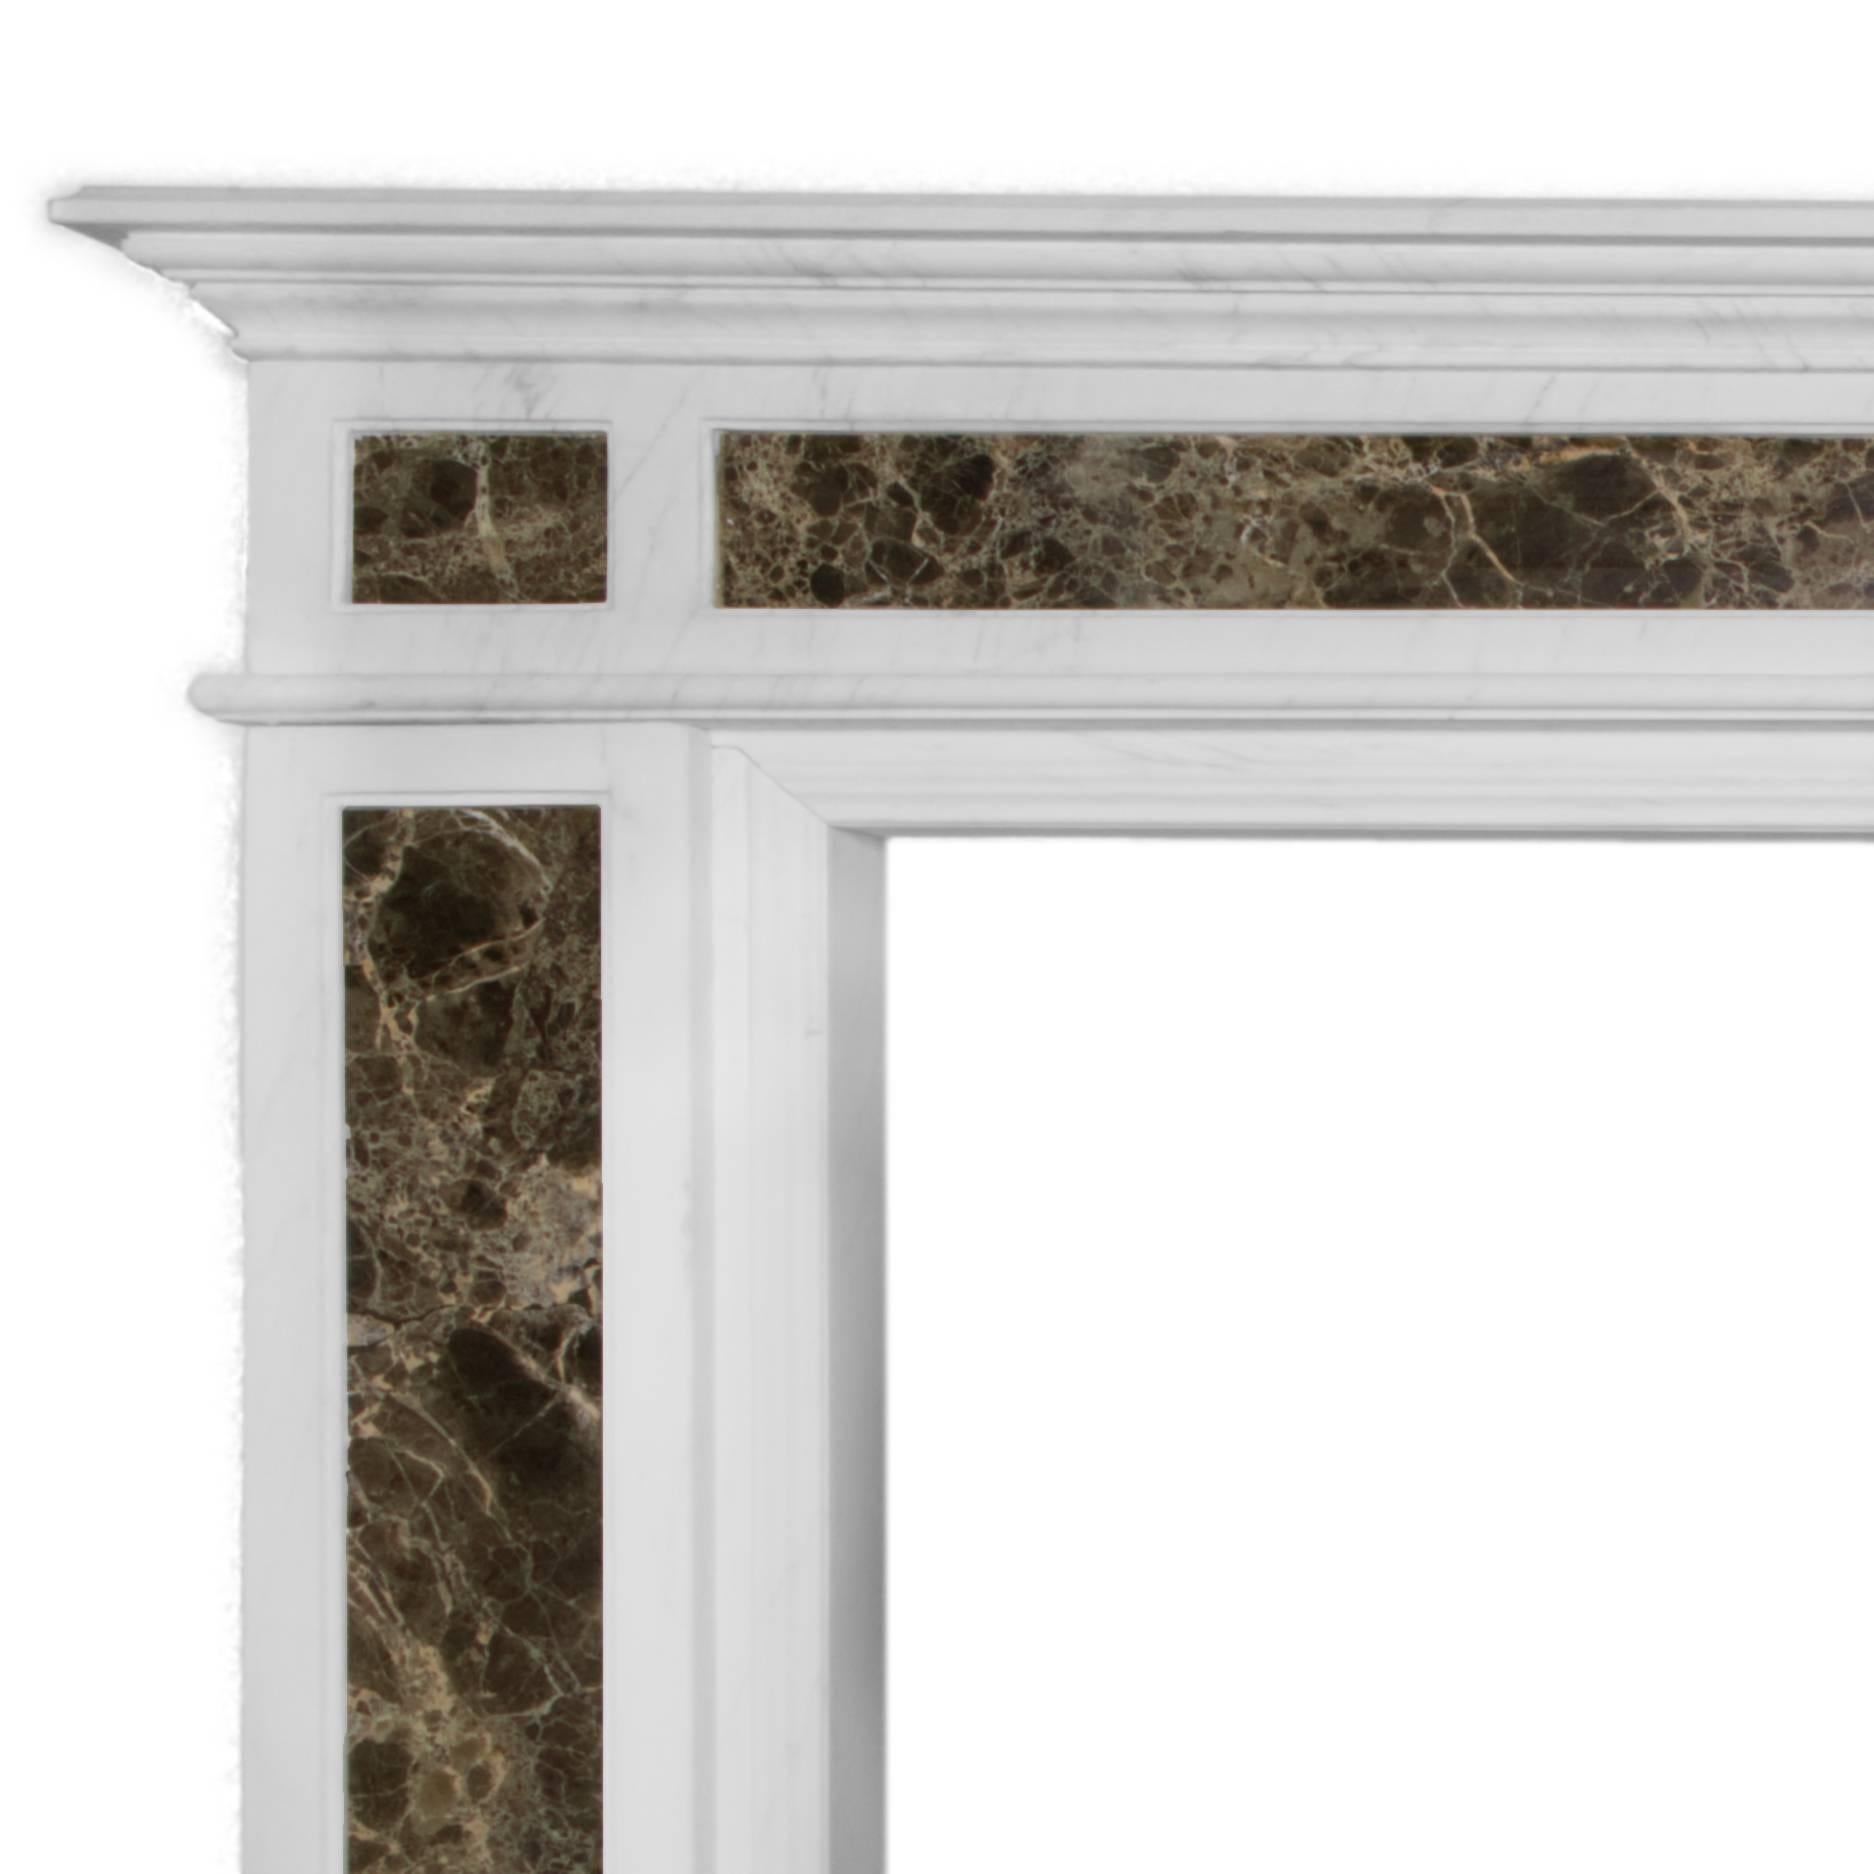 A unique large 20th century Adam style marble fireplace surround.
Made from statuary marble with emperador marble inlay to the recess panels in both Jambs and Frieze. Recently salvaged and restored from a London Town House. 

Measures: 
Shelf width